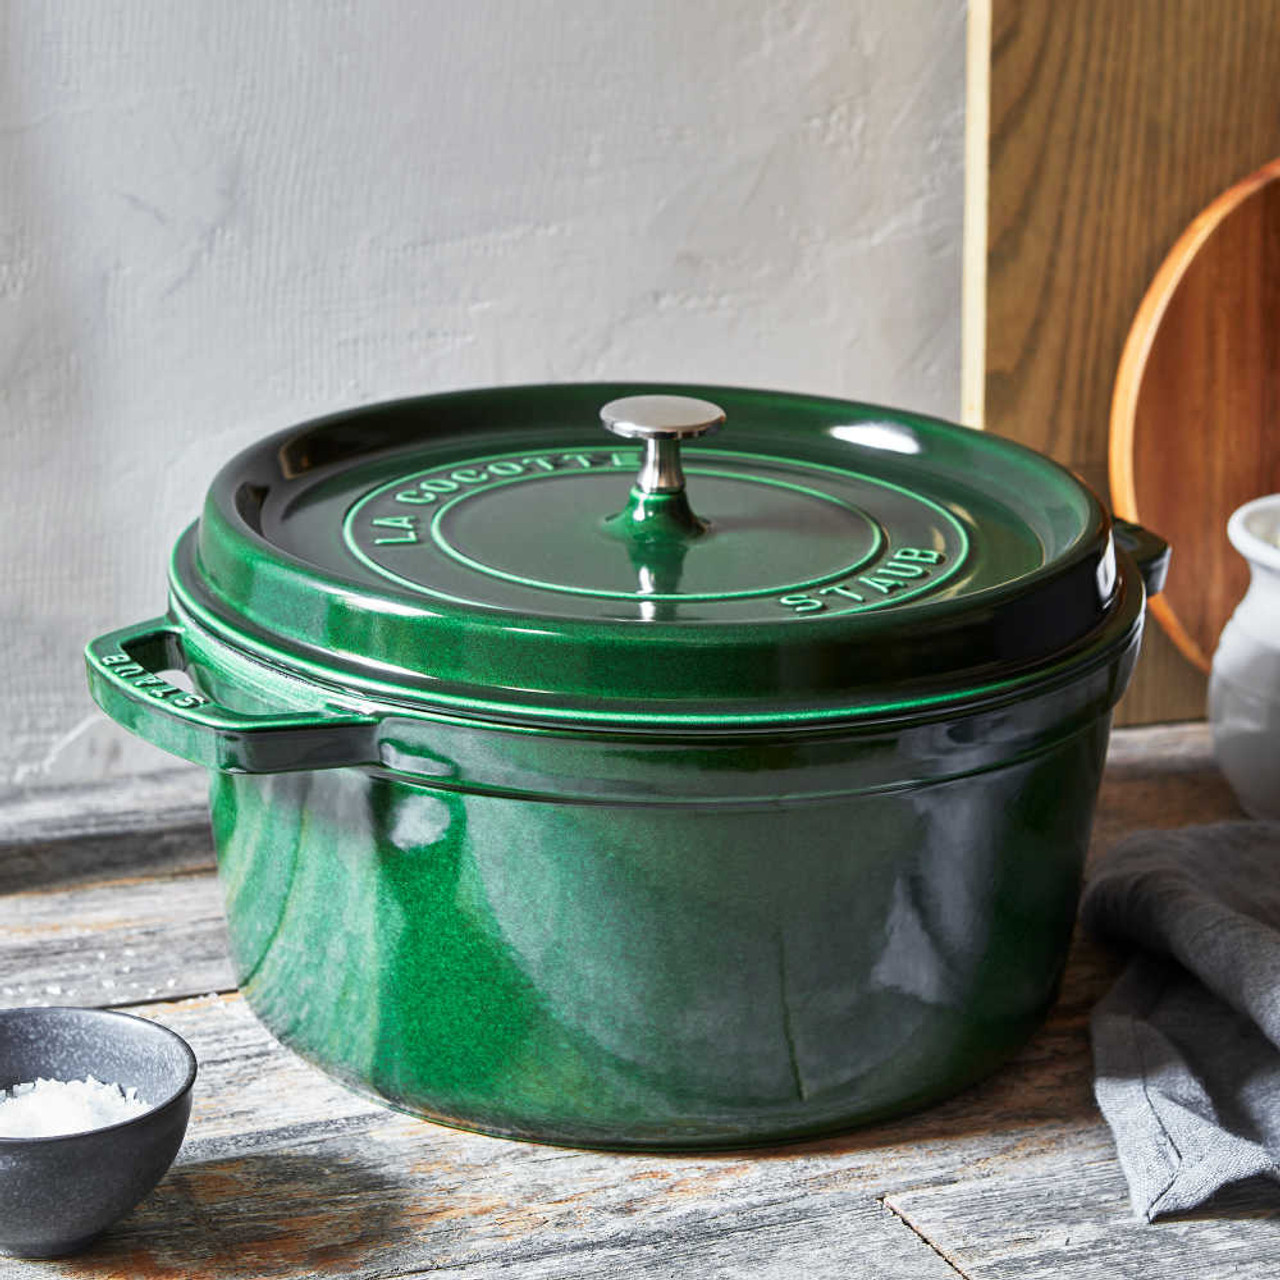 https://cdn11.bigcommerce.com/s-hccytny0od/images/stencil/1280x1280/products/5820/26579/Staub_Cast_Iron_Round_Cocotte_in_Basil__71084.1702423595.jpg?c=2?imbypass=on